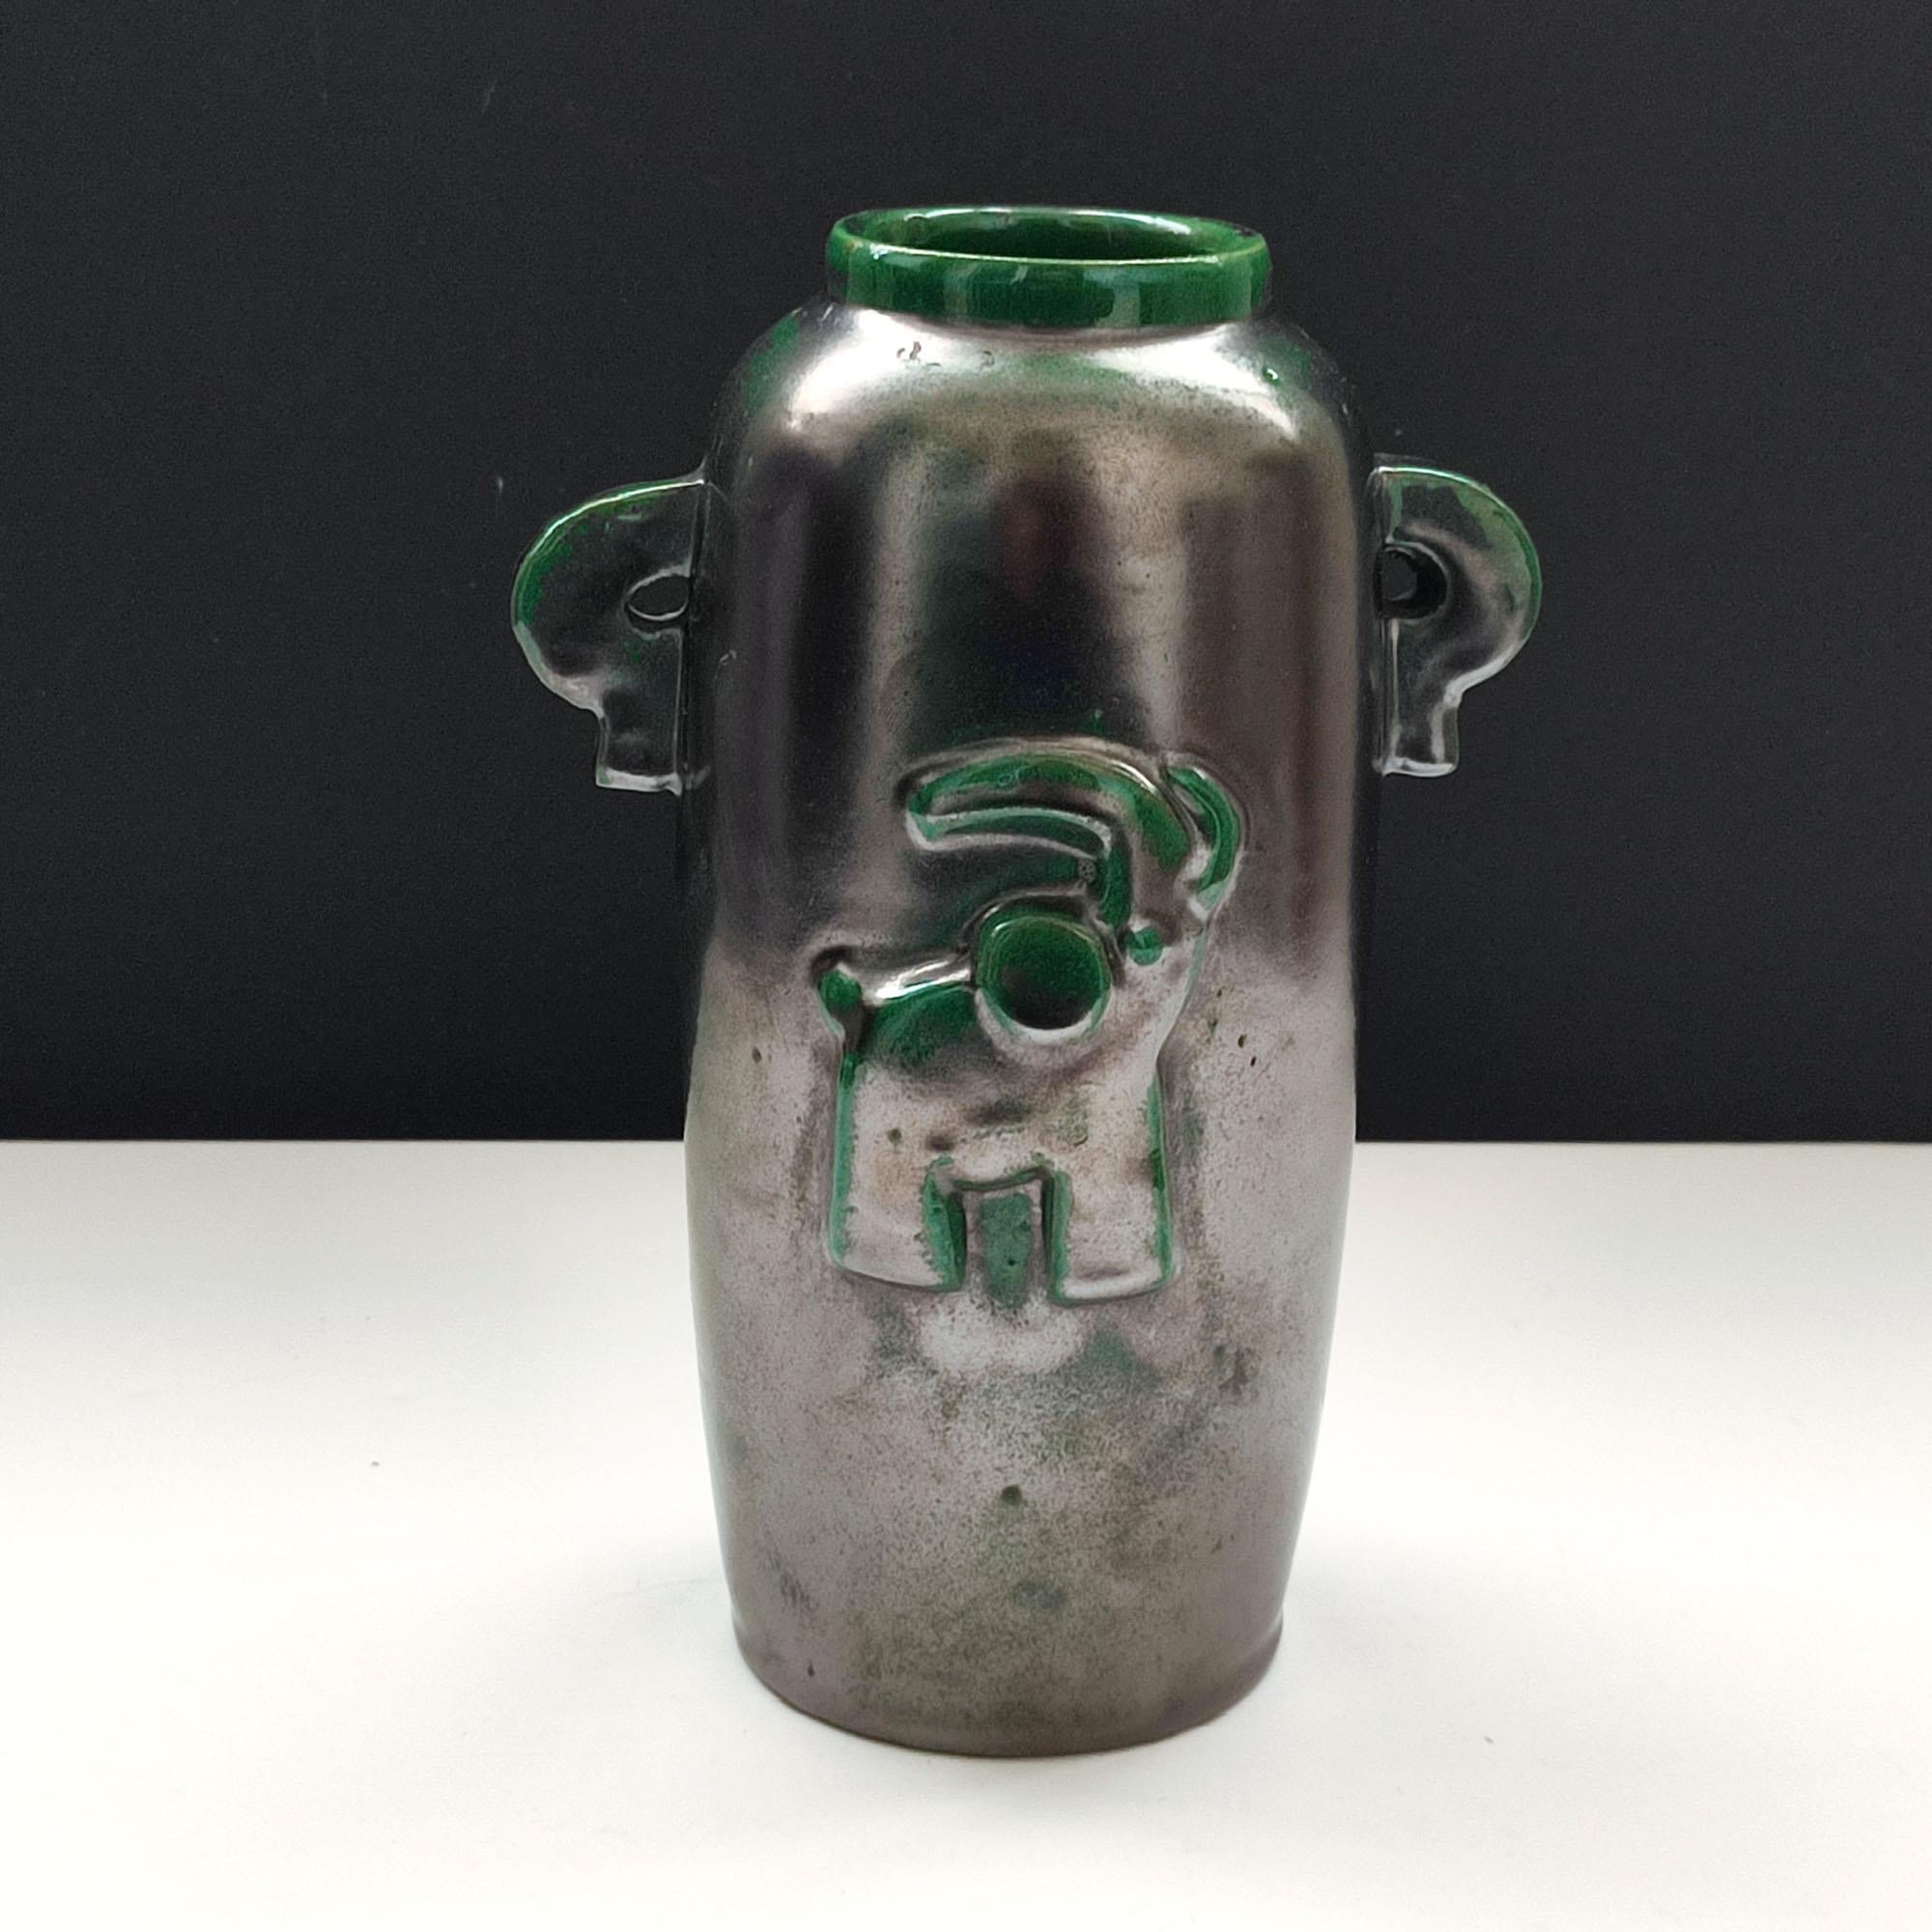 A green and black luster, glazed earthenware vase designed by Einar Luterkort for Motala Lervarufabrik in the 1930s. Clean Art Deco desgn featuing a stylized elephant in relief on the front. Two small decorative handles on sides.
Vey good